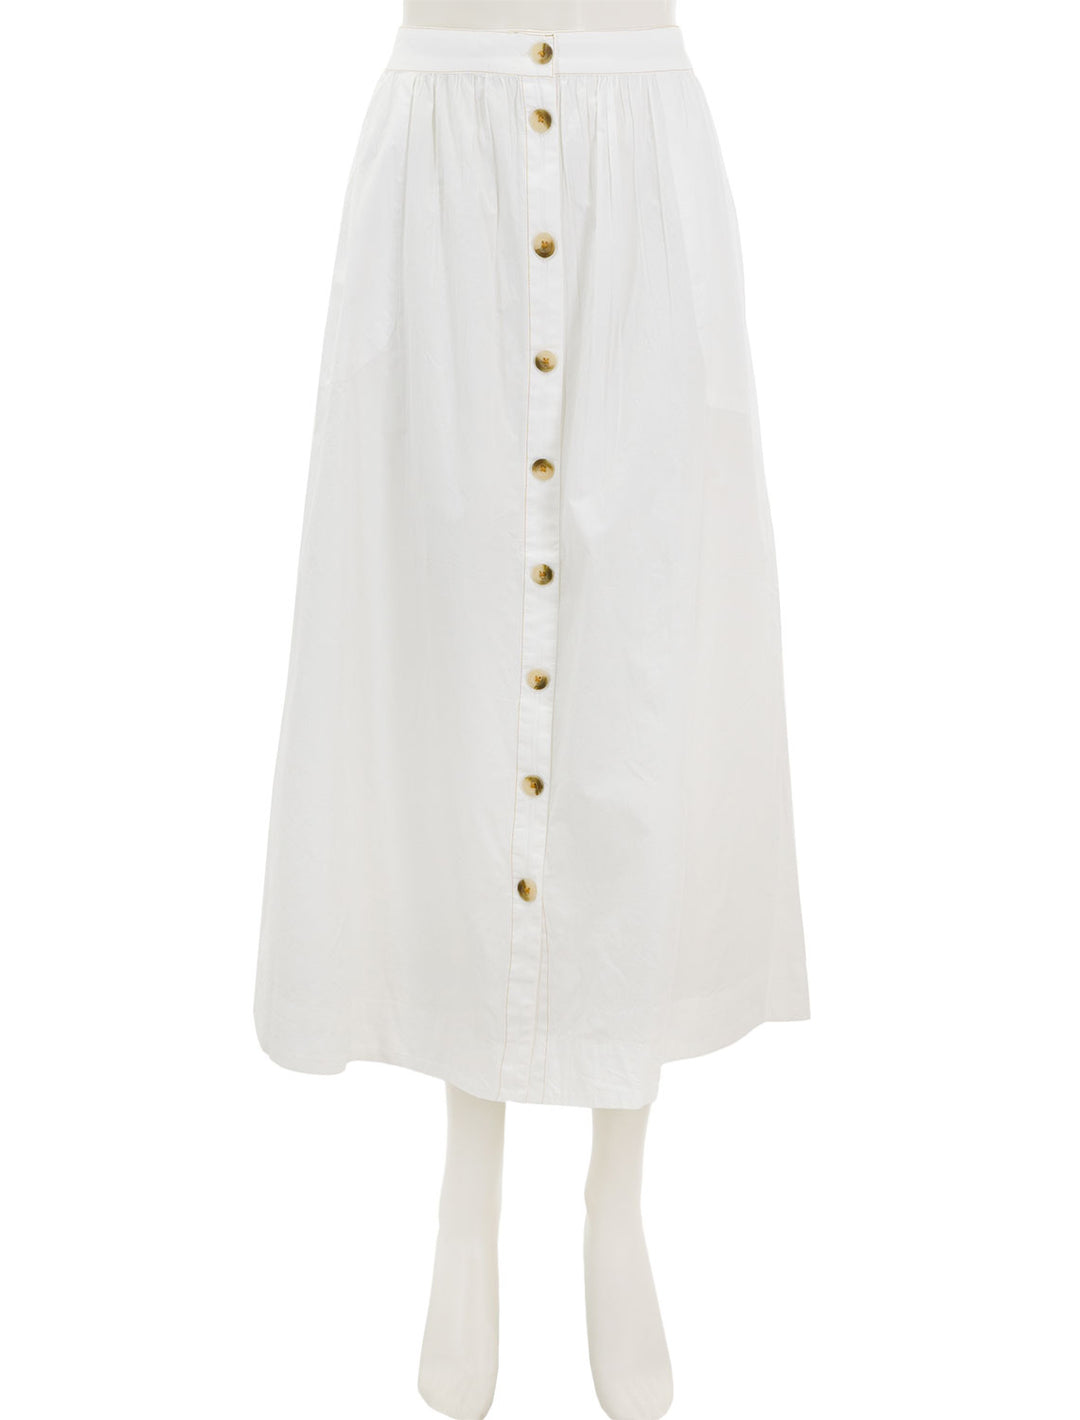 Front view of Lilla P.'s button front long skirt in white.